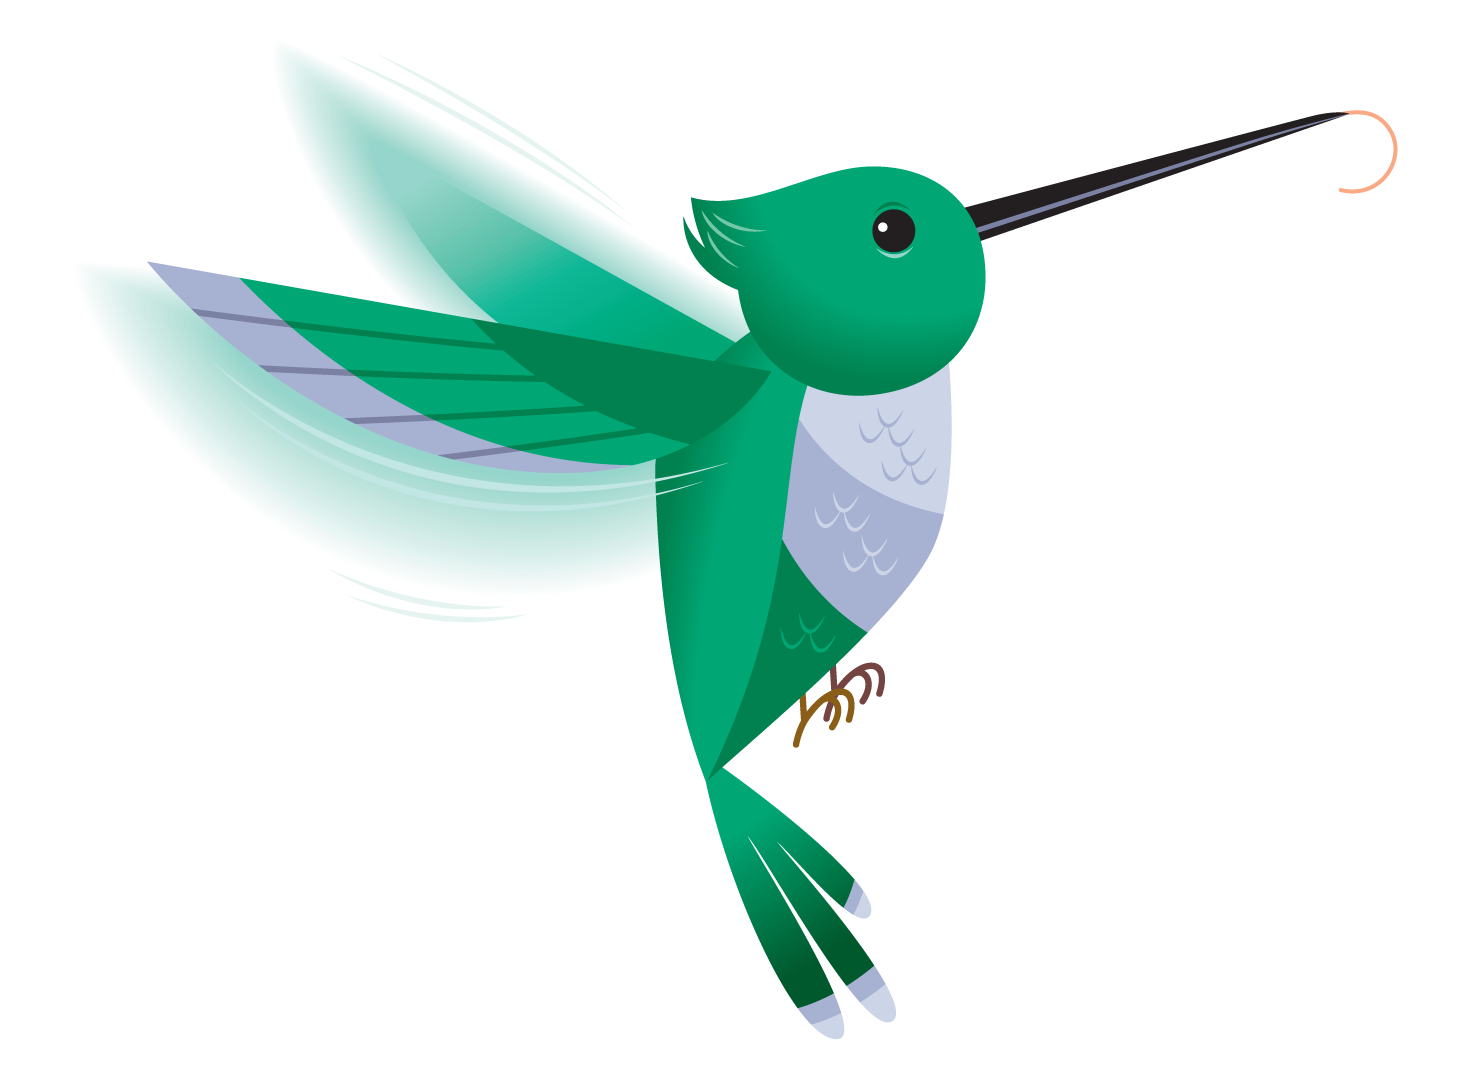 Hummingbird Clipart - Free Clipart Images